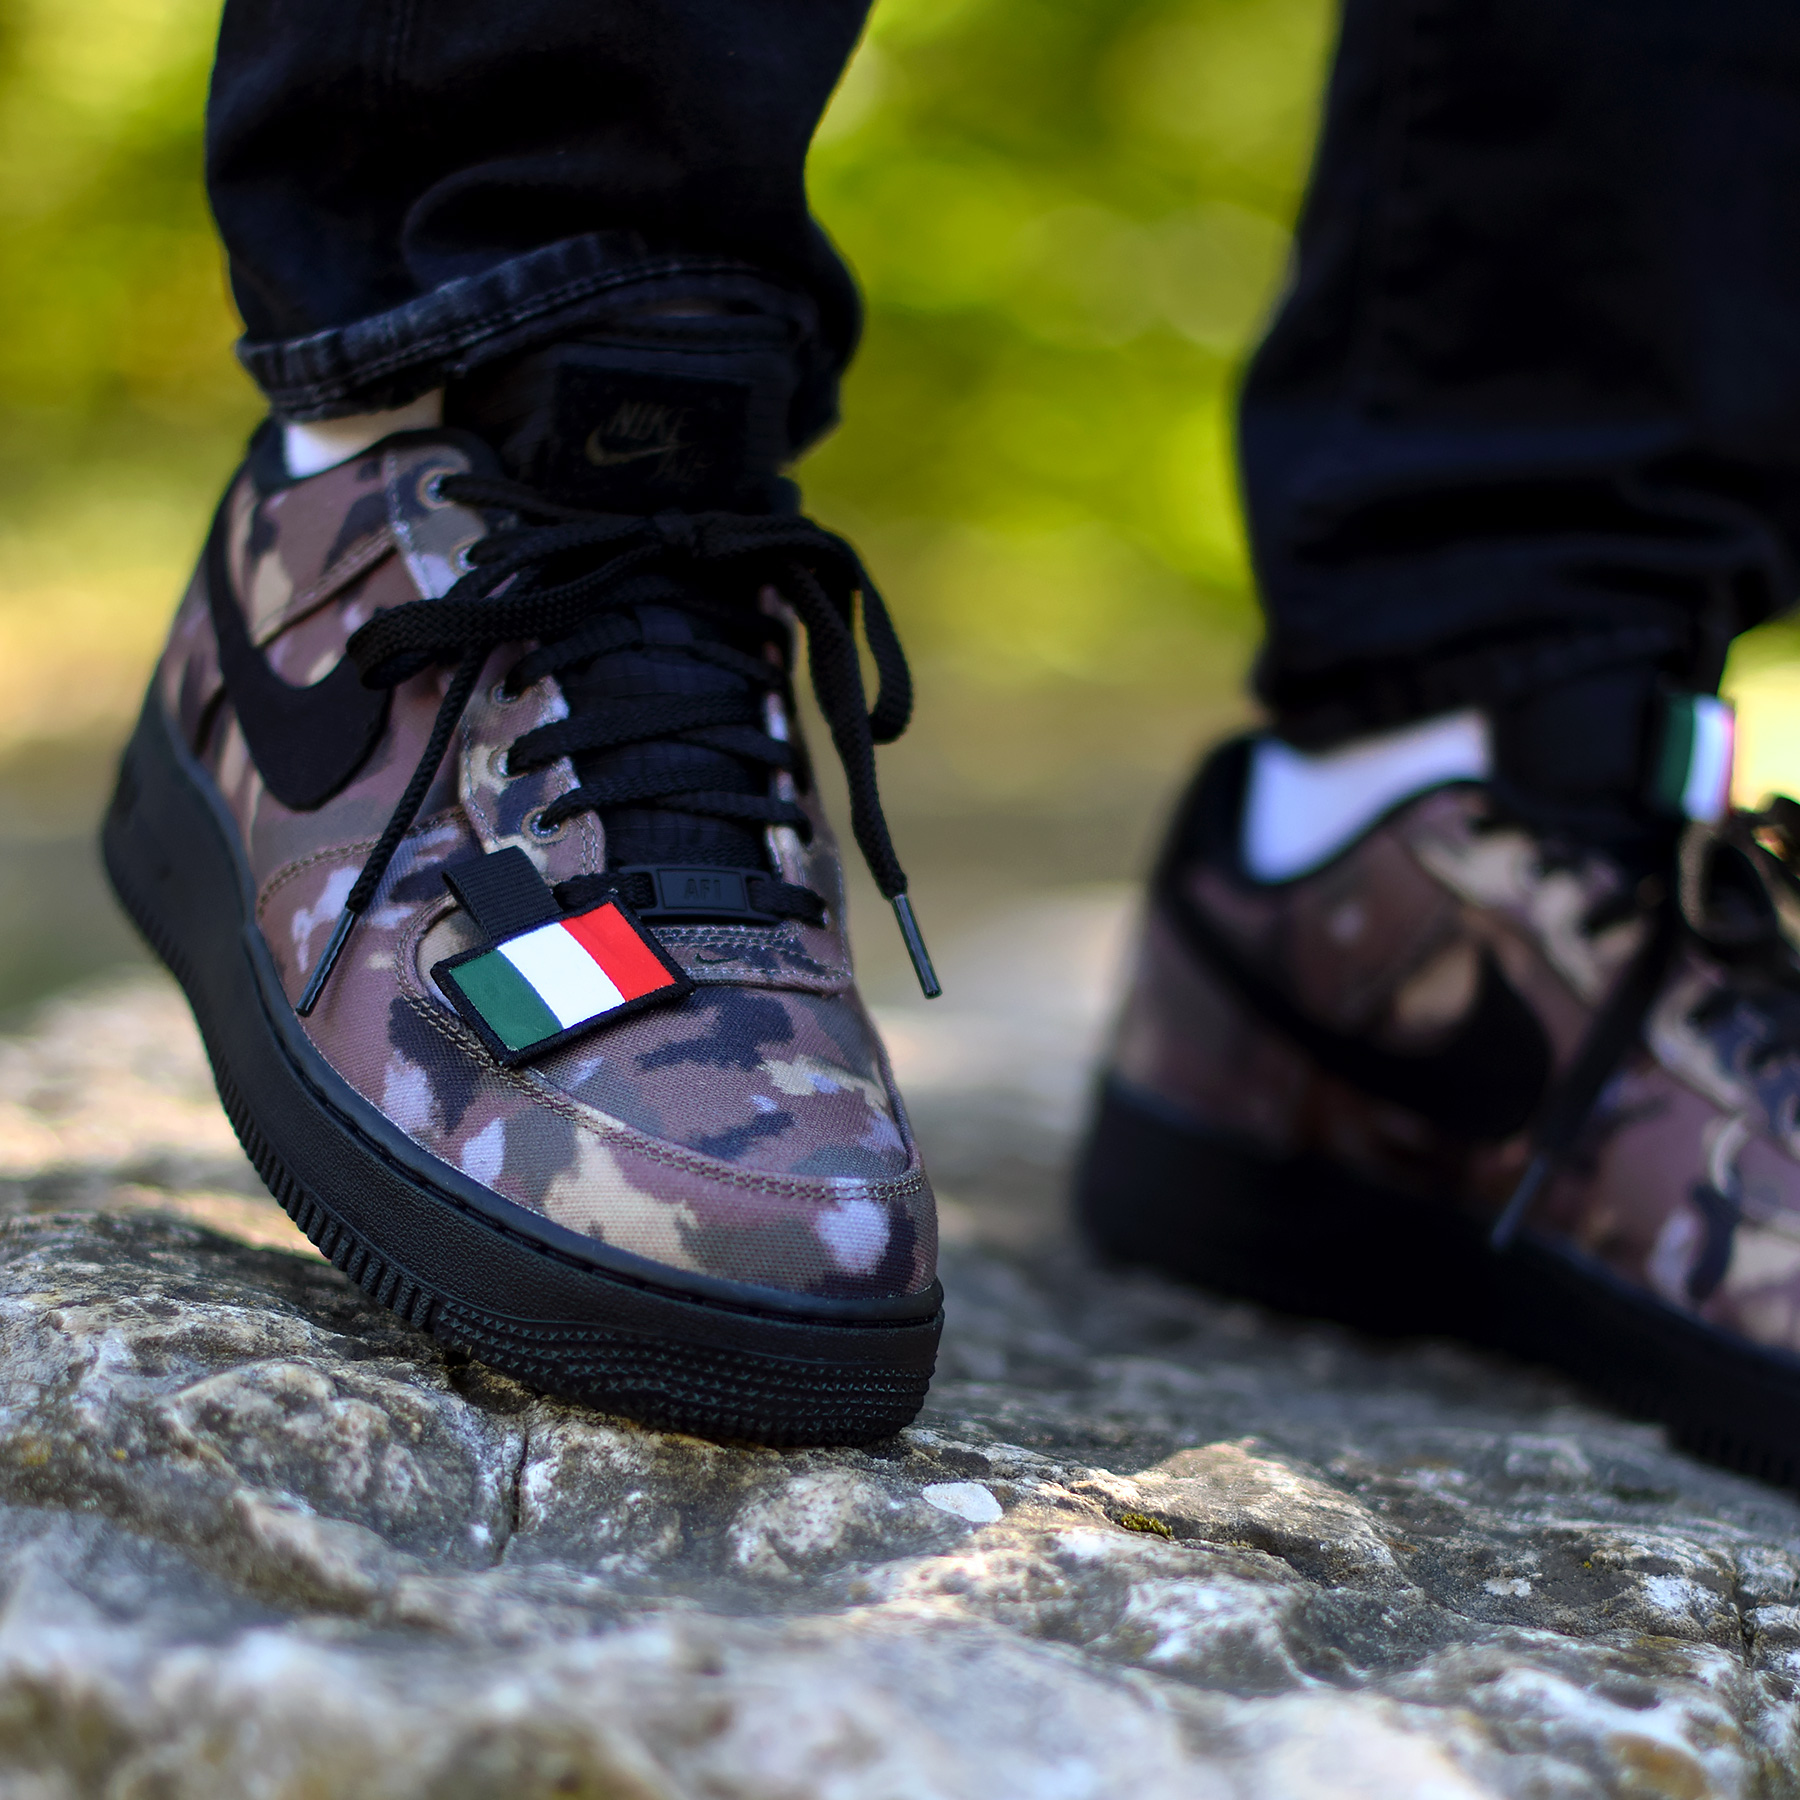 nike air force 1 camo italy